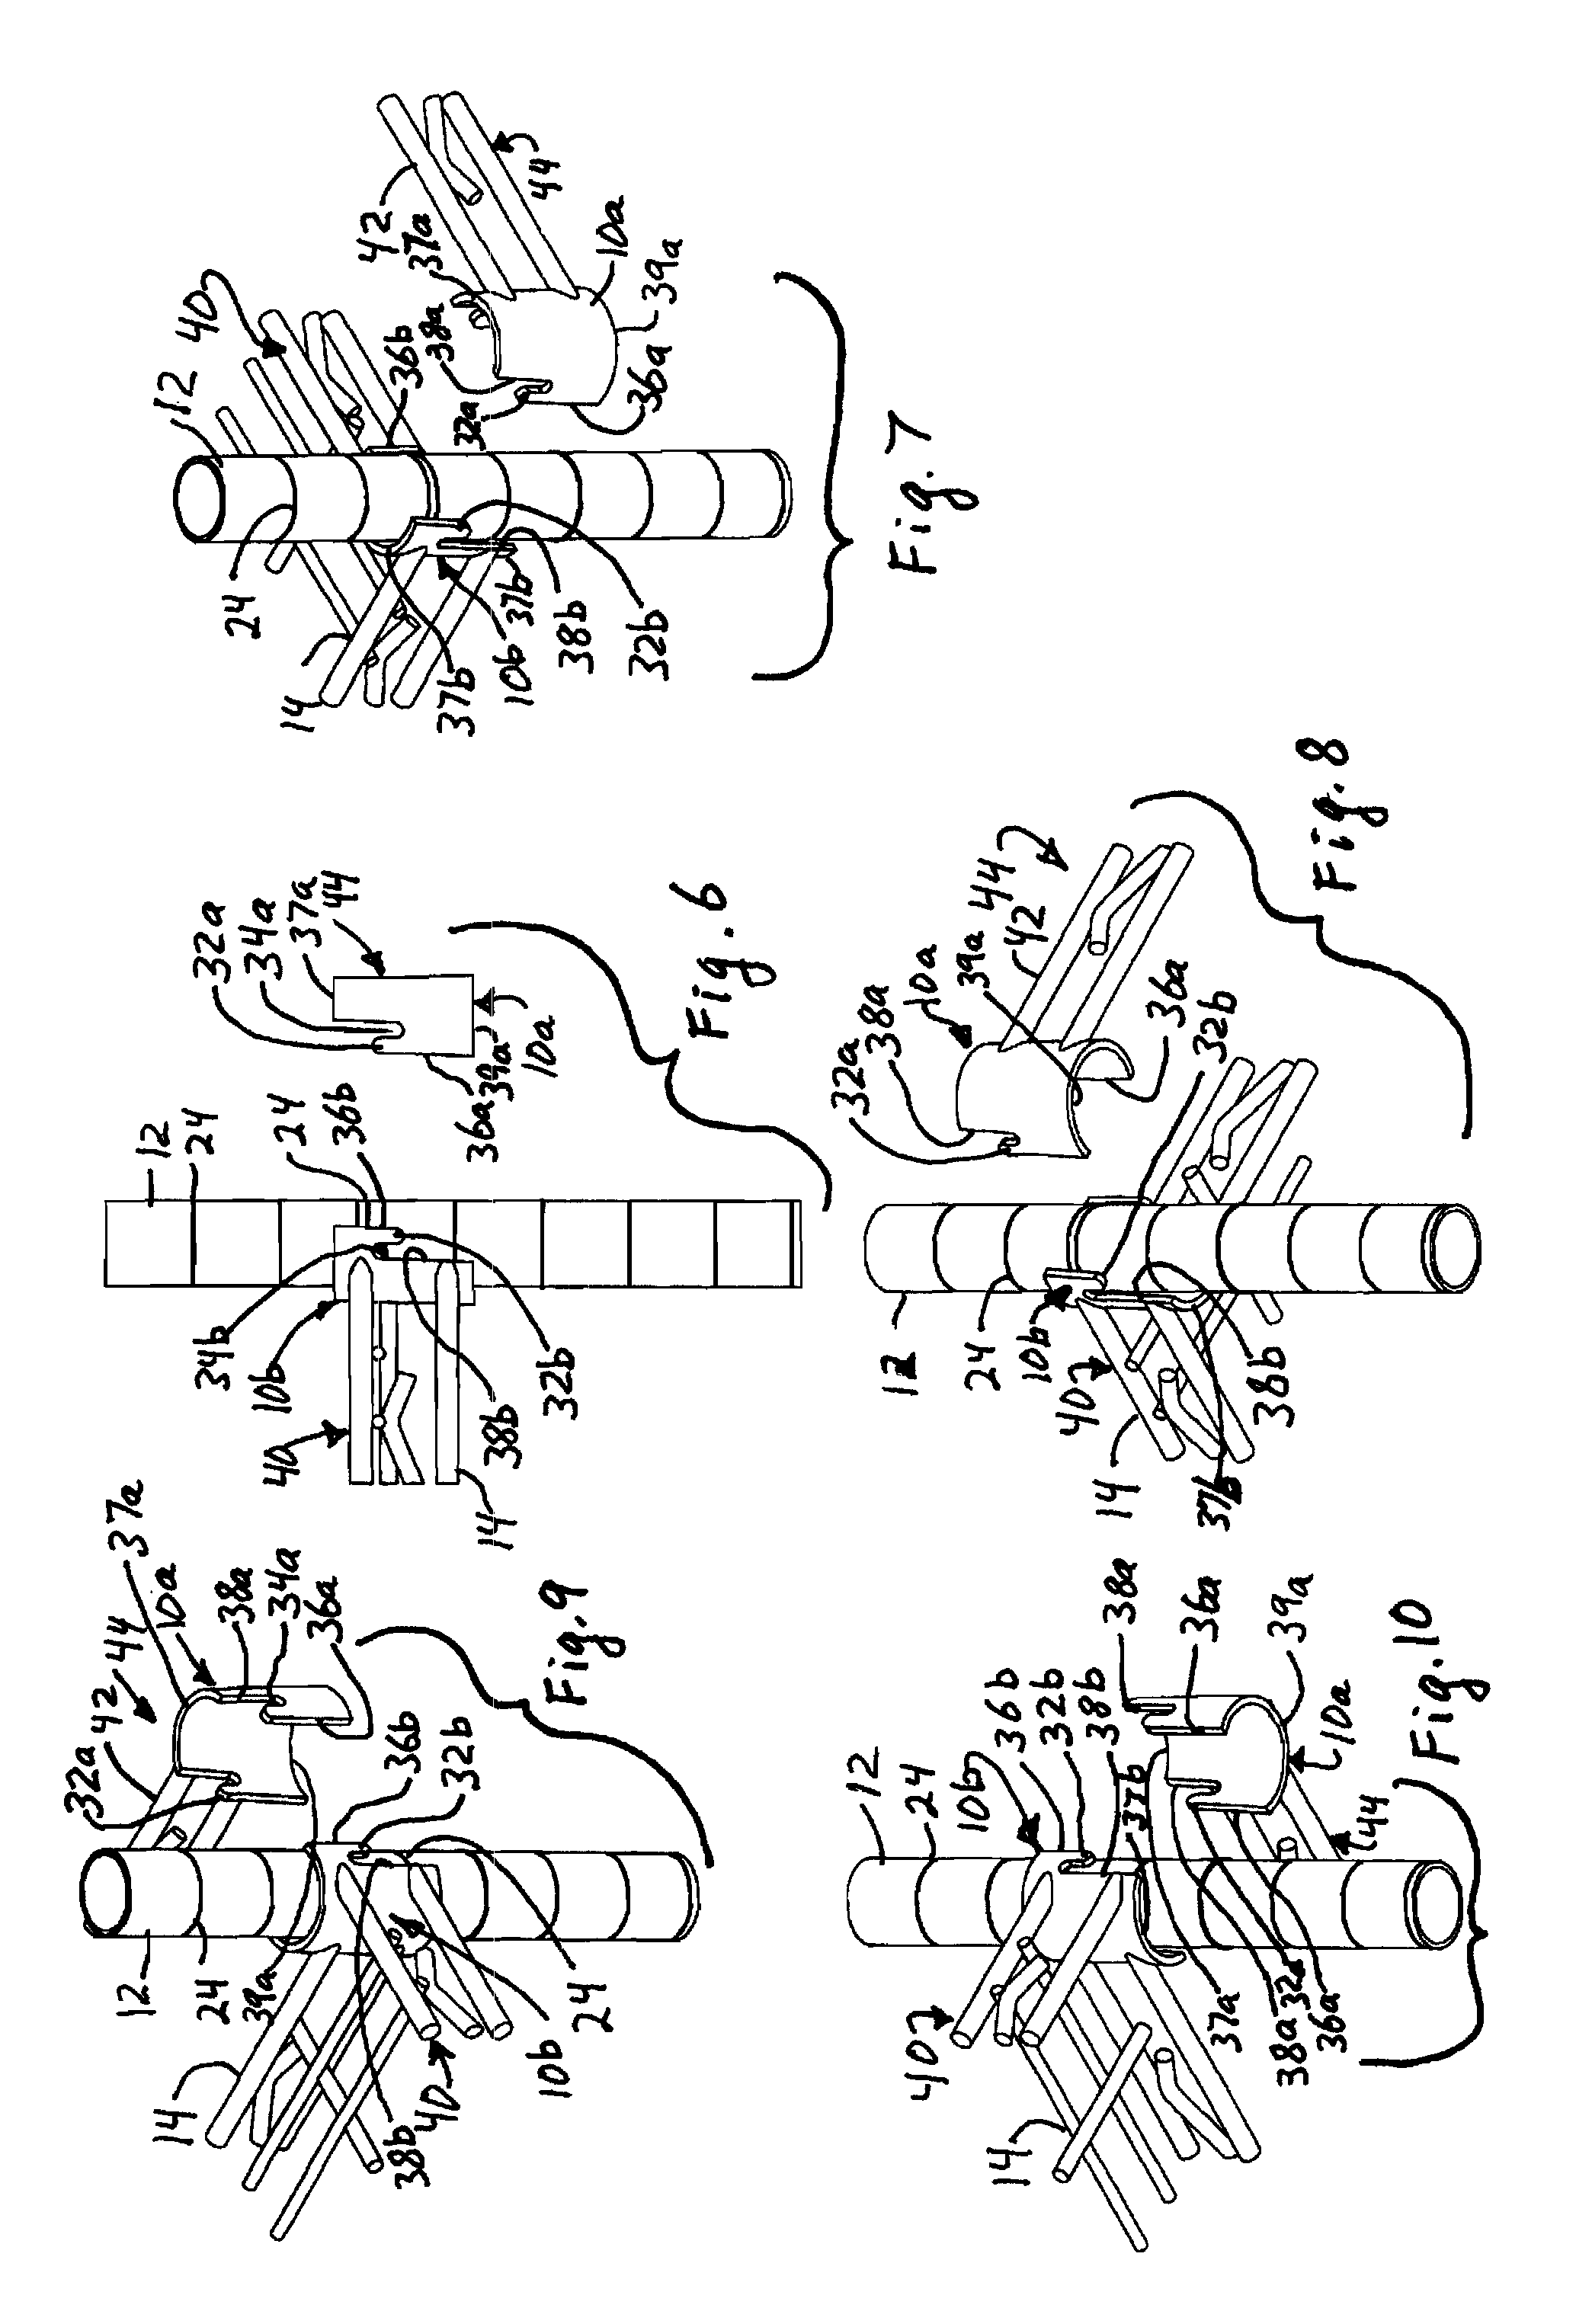 Shelving connector and method of manufacture